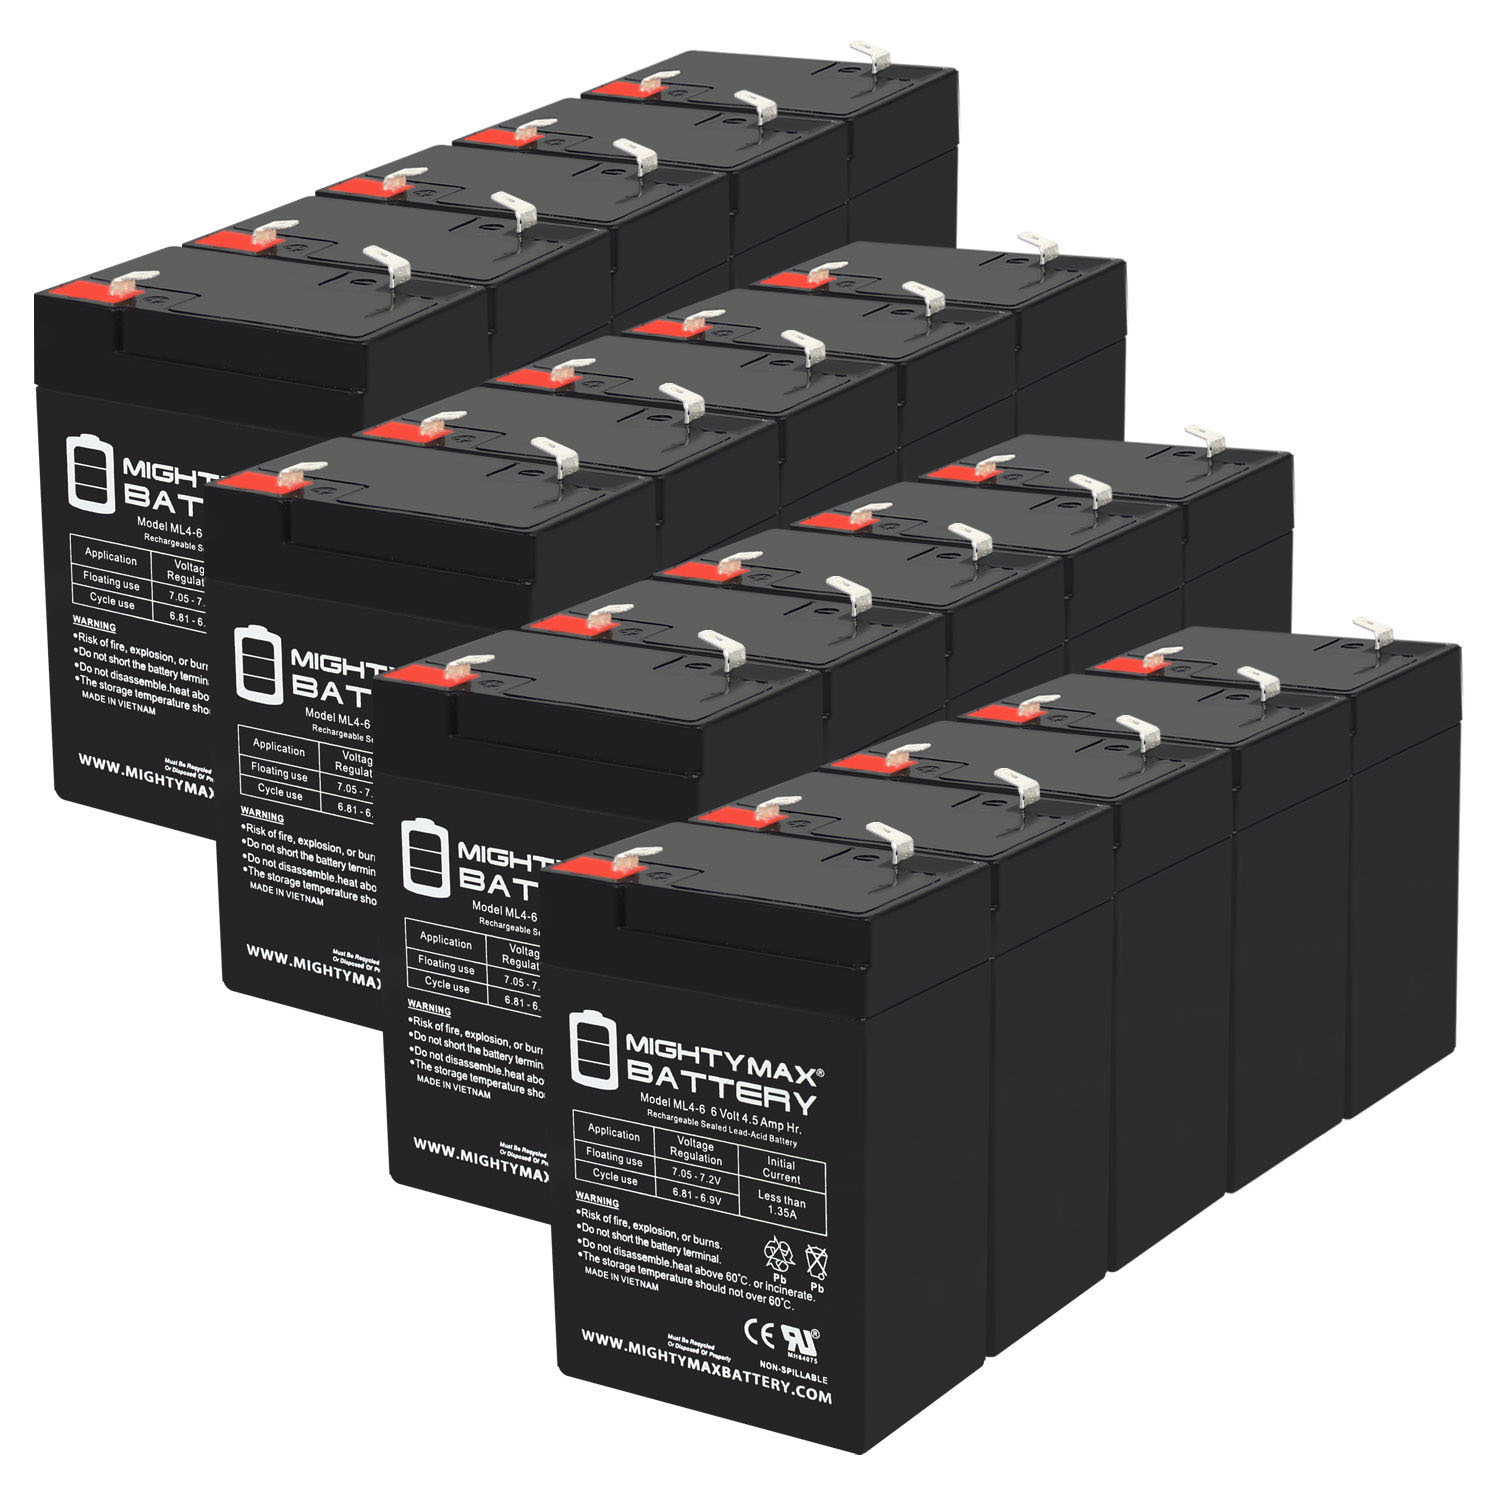 6V 4.5AH Replacement Battery for Tripp Lite Datashield DT250 - 20 Pack